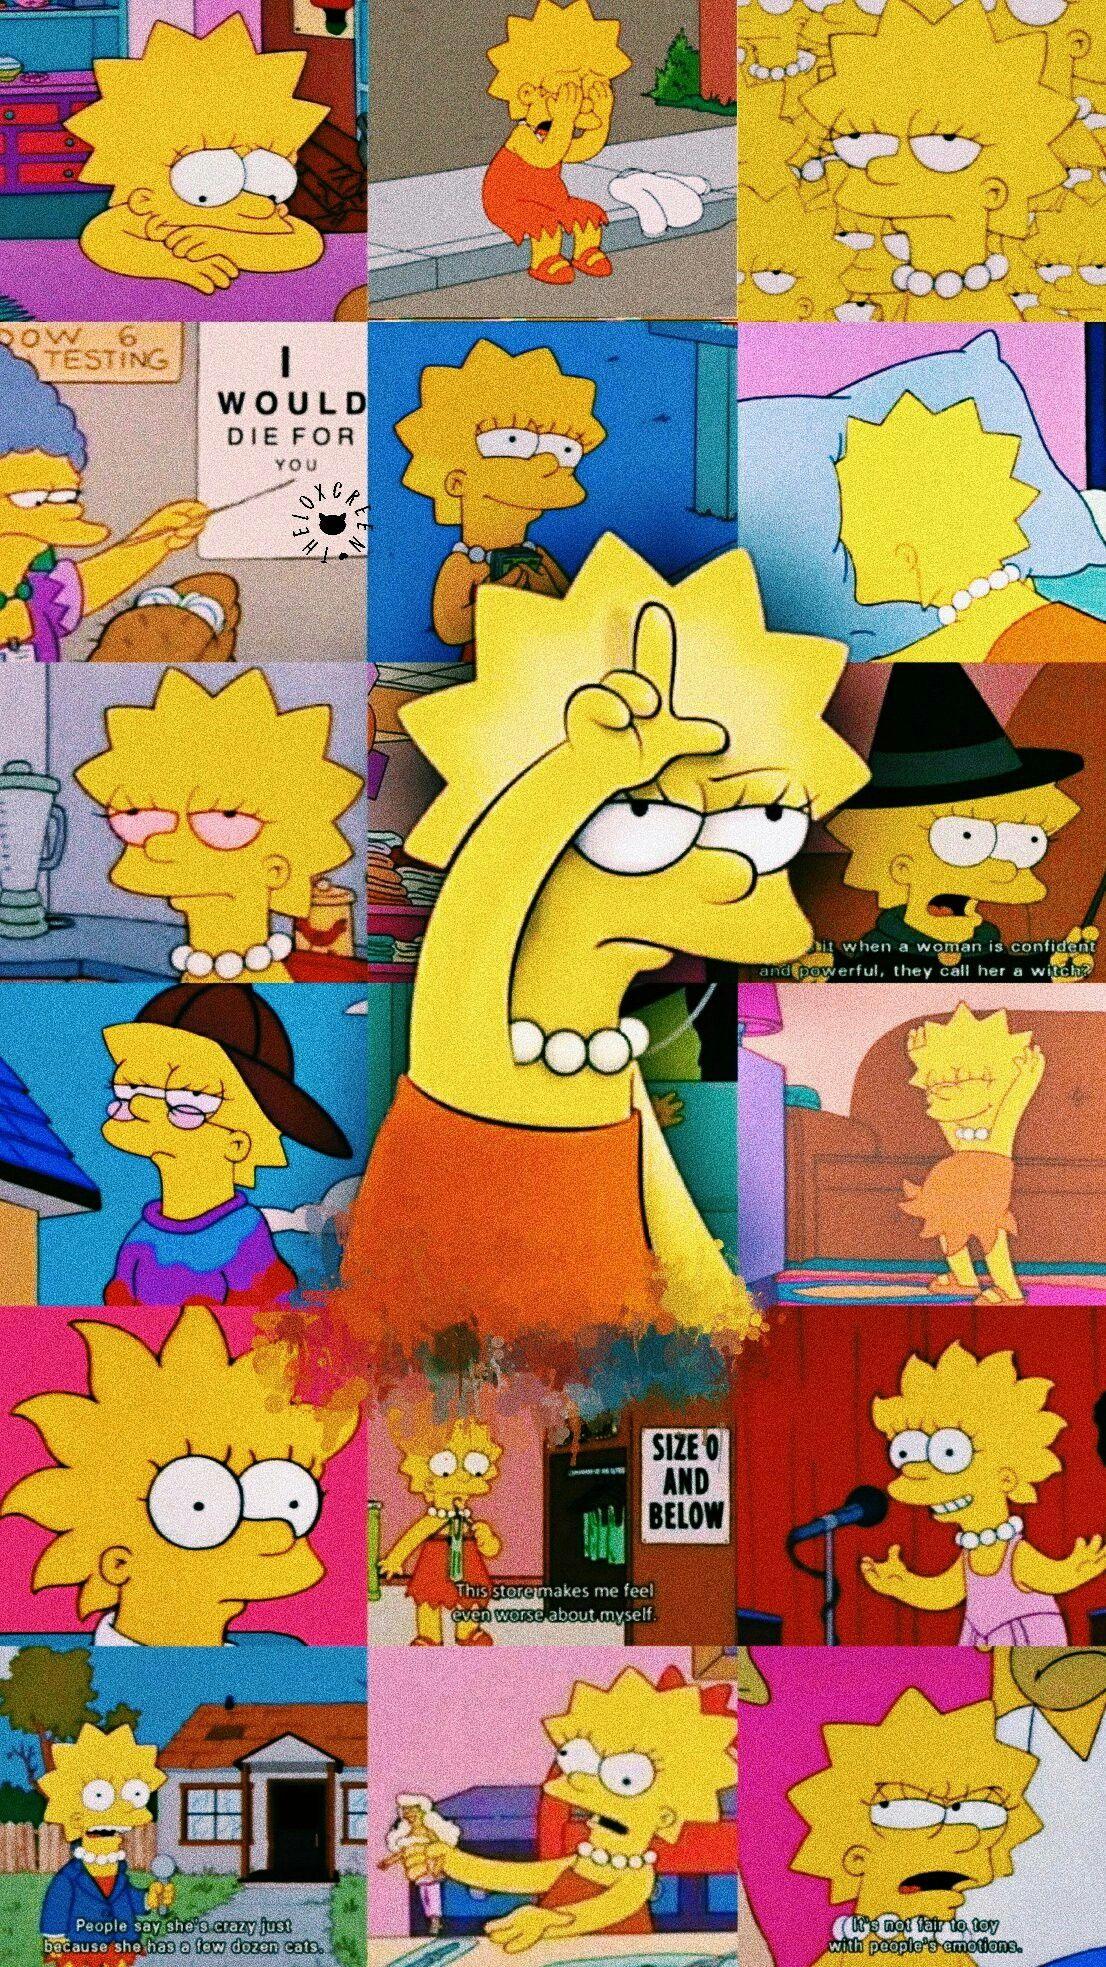 Lisa Simpson wallpaper I made! Let me know if you'd like me to make more! - Lisa Simpson